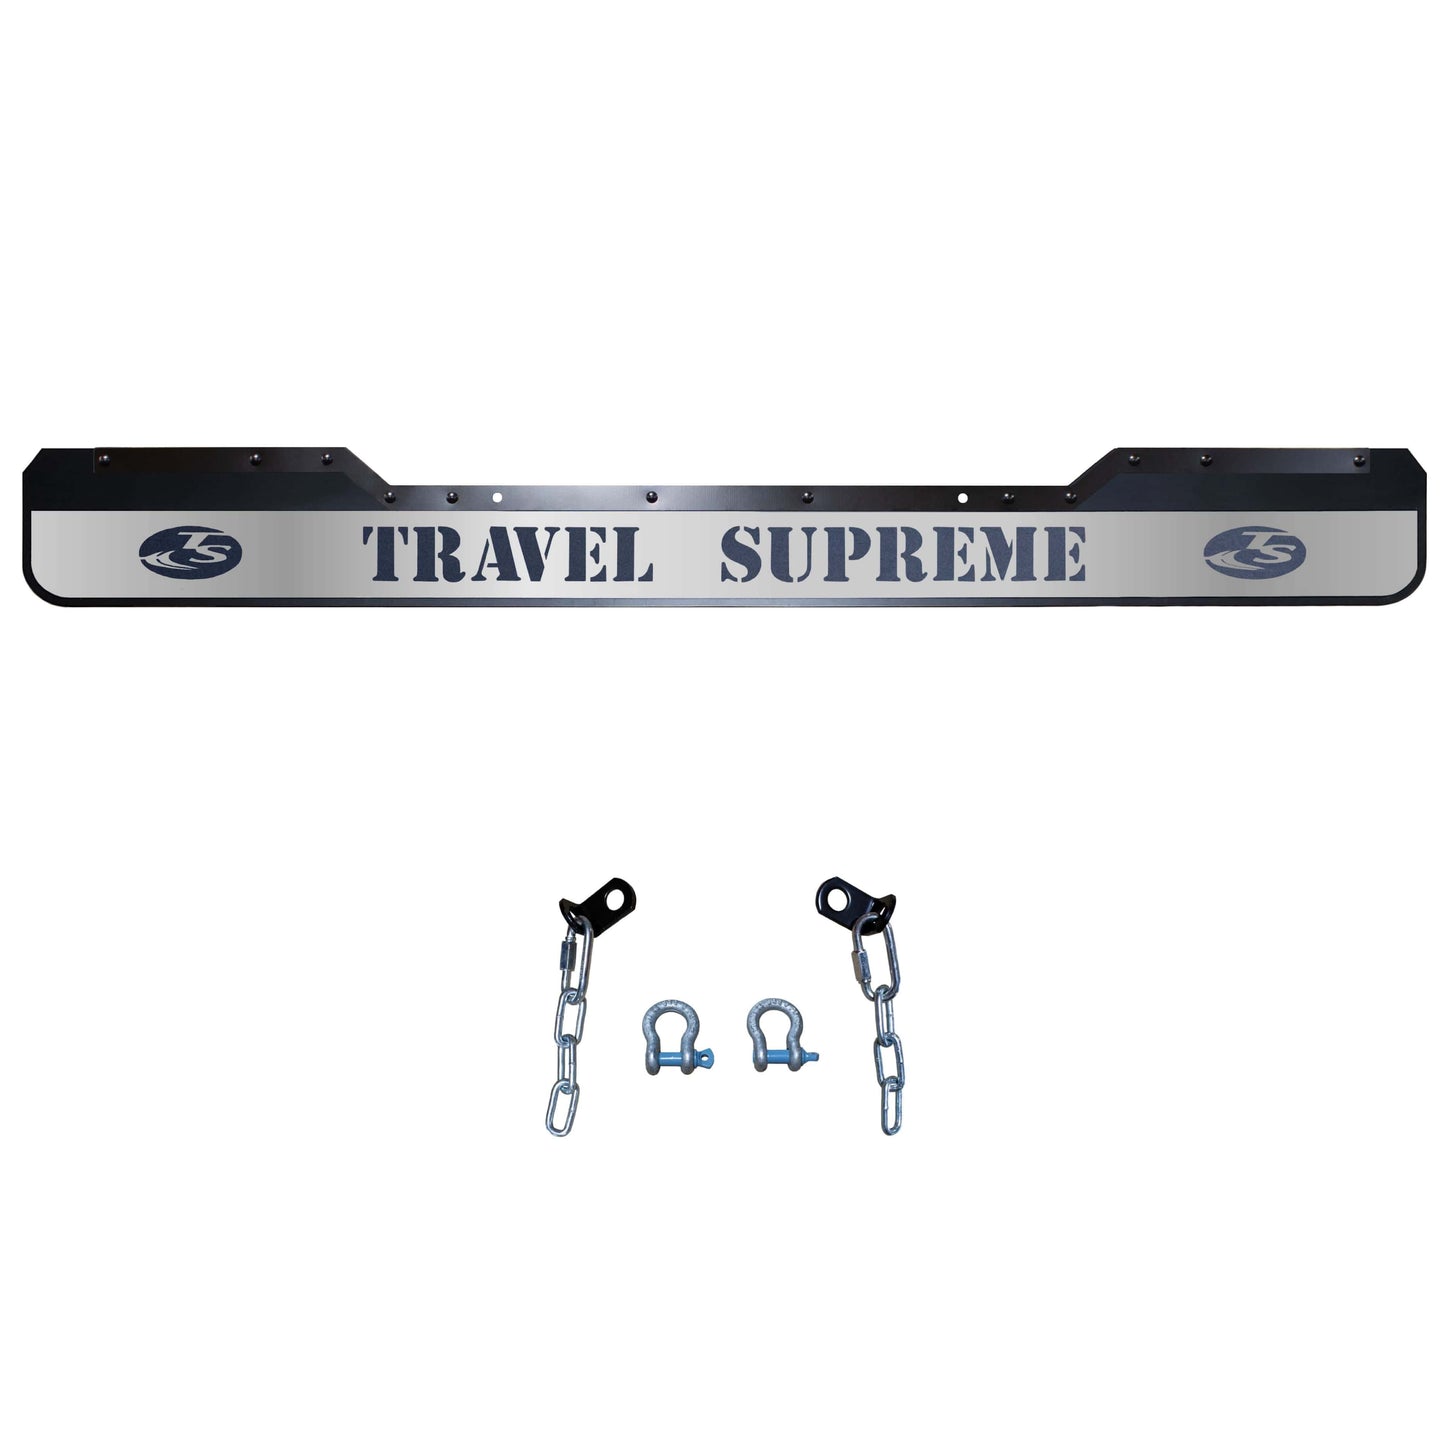 Future-Sales-Rock-Guard-TRAVEL-SUPREME-11-Notched-MFR-TS-11N-11-by-95-Center-Notch-Mirror-Finish-Face-Plate-hardware